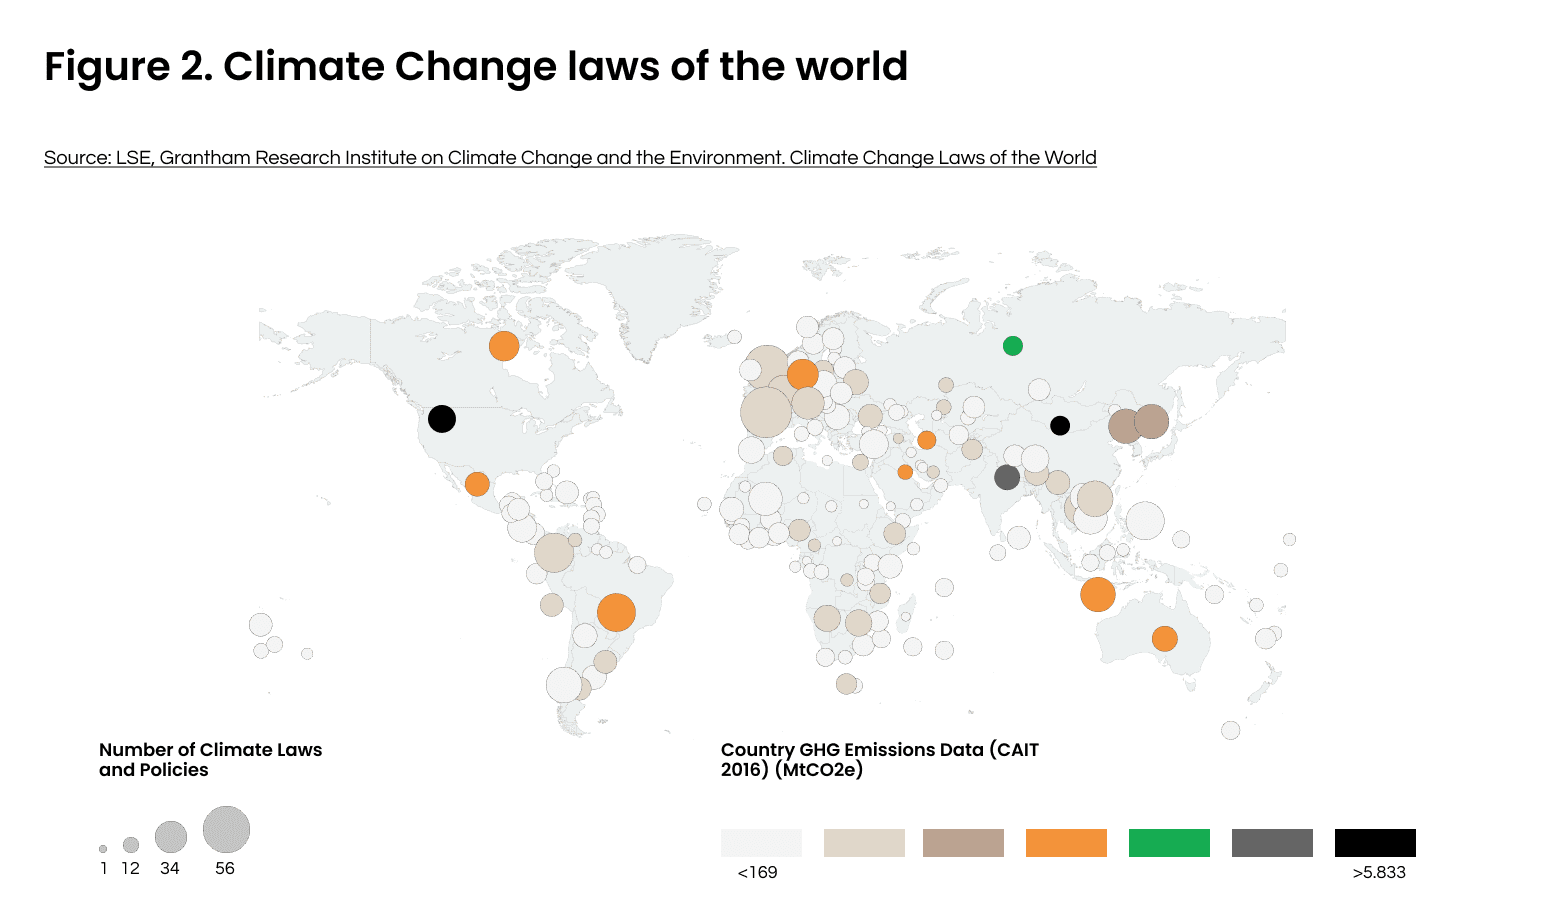 Figure 2. Climate laws and policies